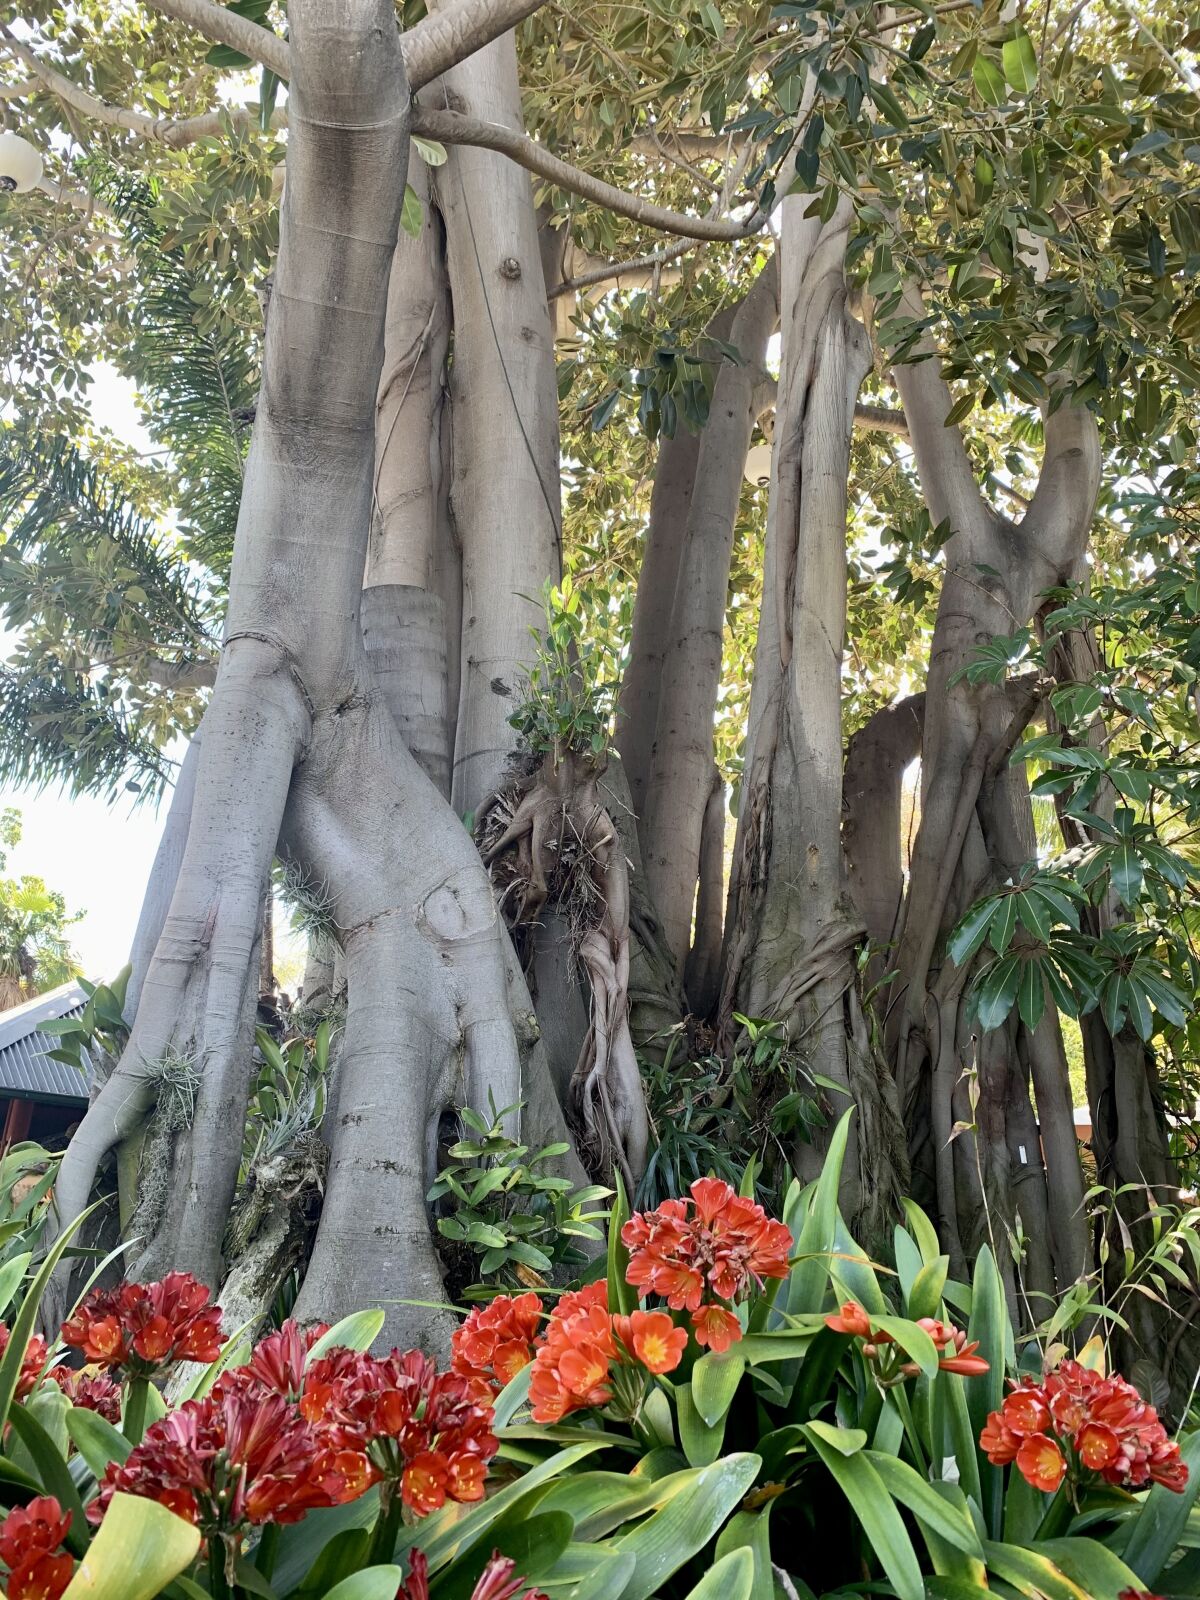 On Monkey Trails at the San Diego Zoo, look for the giant Moreton Bay Fig, Ficus macrophylla.